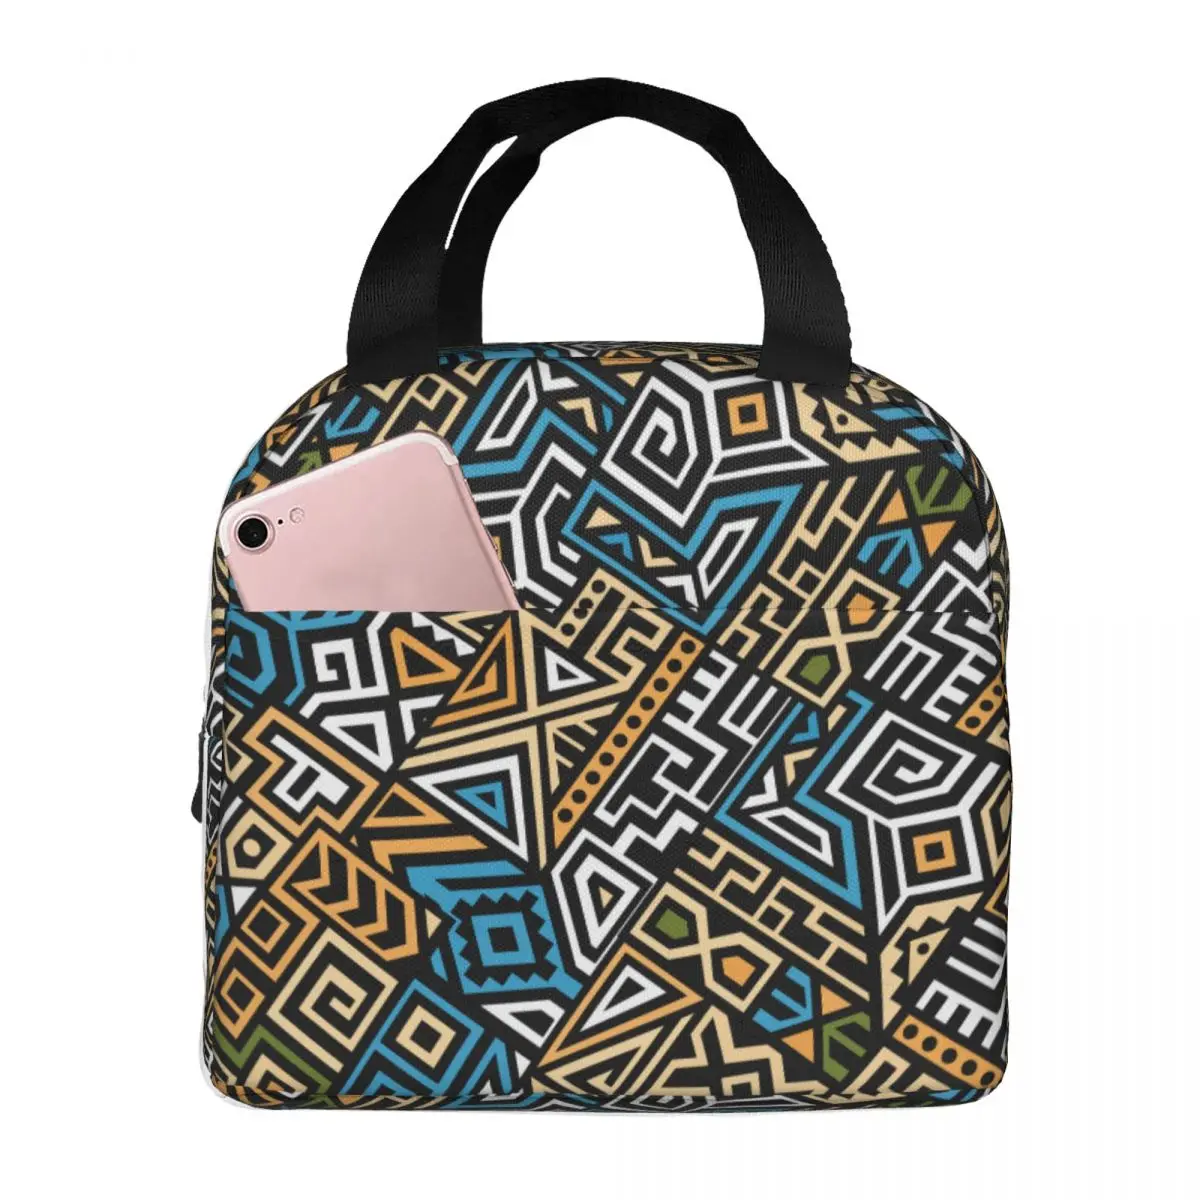 Lunch Bags for Women Kids Creative Ethnic Style Square Geometric Thermal Cooler Portable Picnic Oxford Lunch Box Handbags